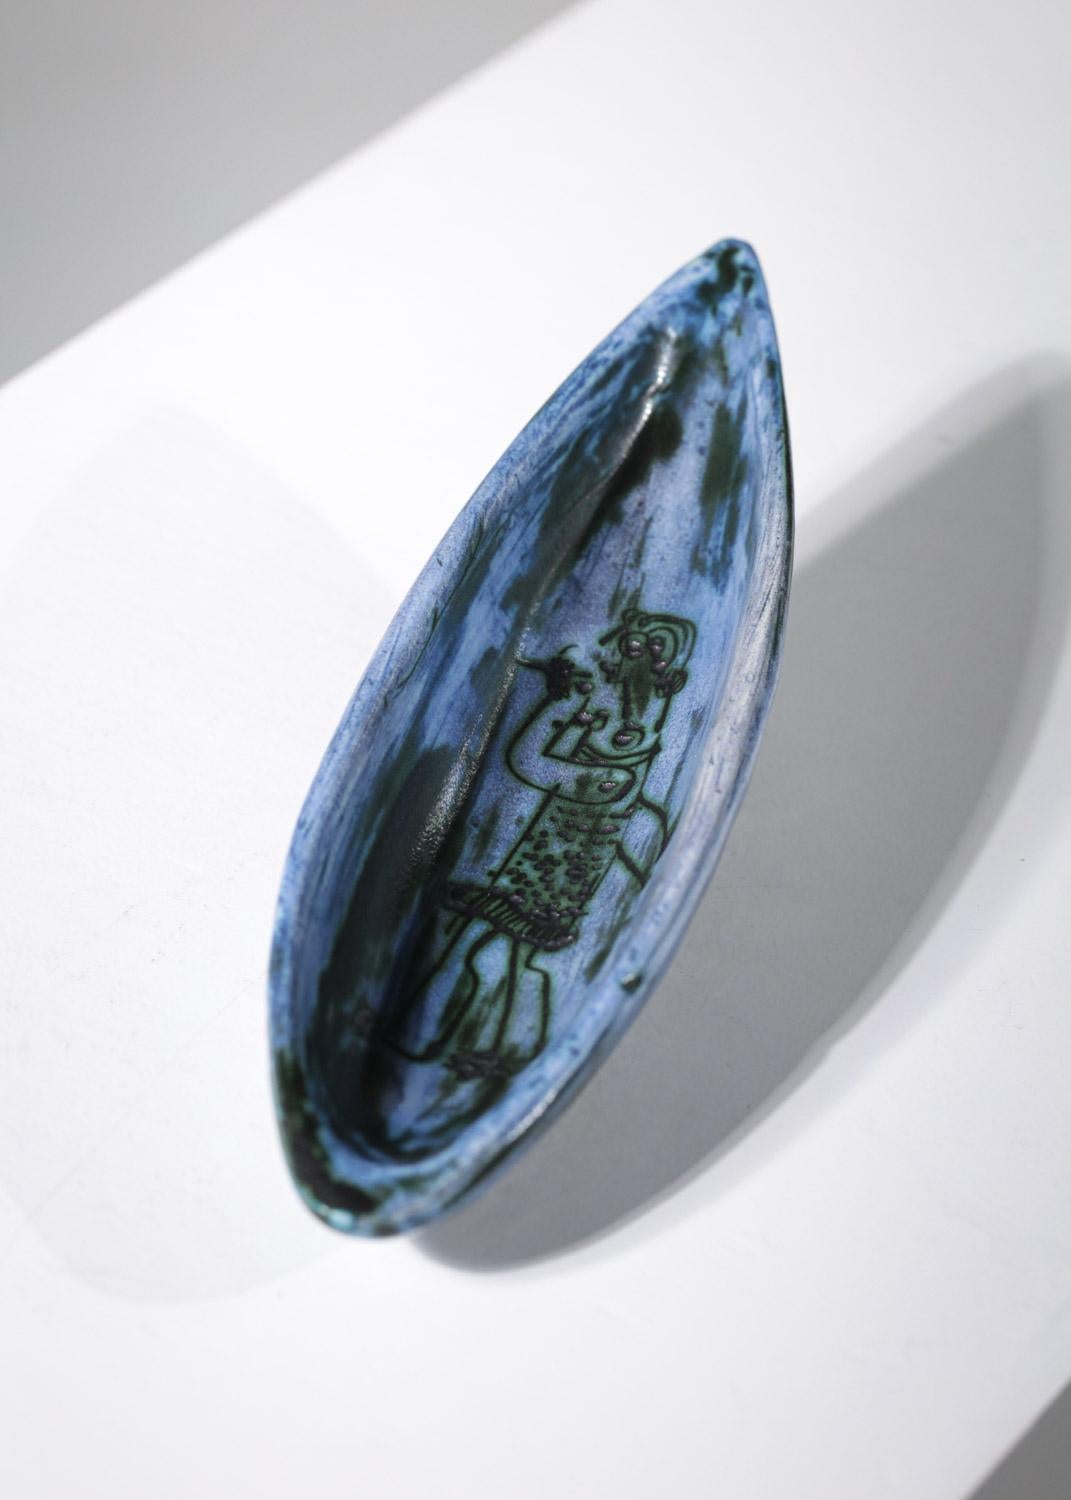 Ceramic pipe rest or bowl by the French artist Jacques Blin dating from the 60s. Small oval bowl resting on two feet with enamels in shades of blue typical of the artist, presence of a drawing representing a character who smokes. Signature of the